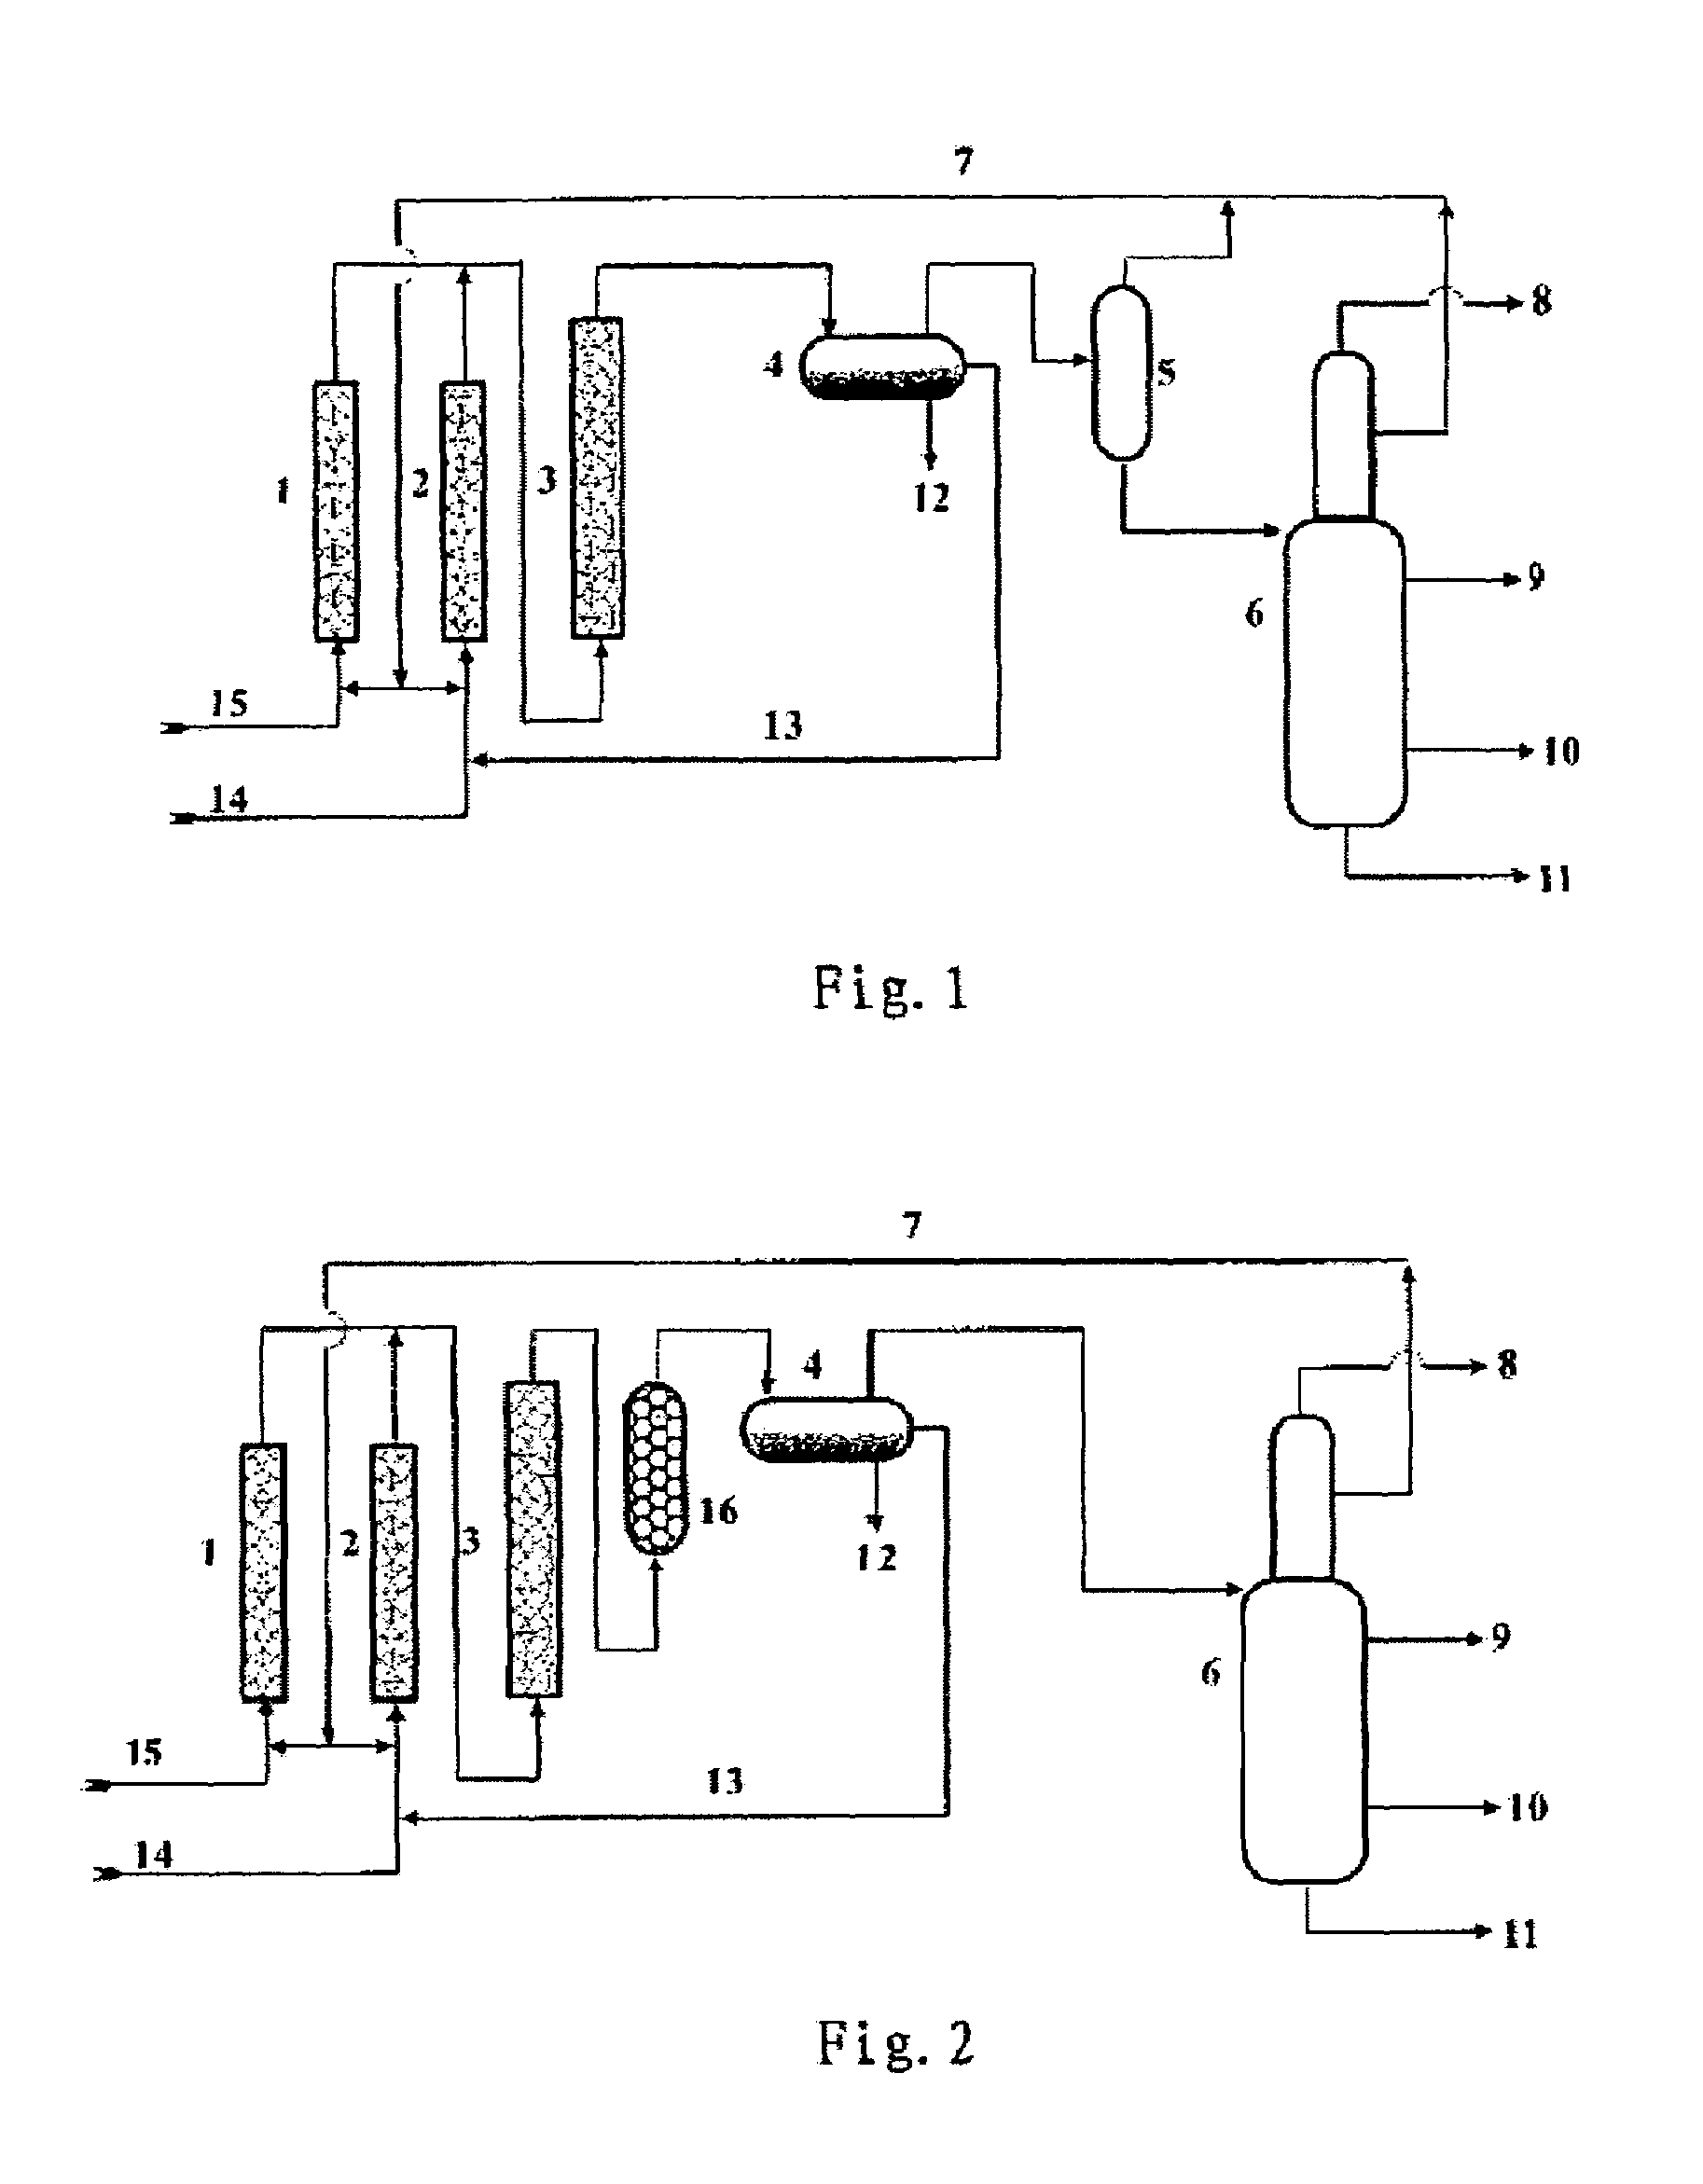 Method for manufacturing alkylate oil with composite ionic liquid used as catalyst